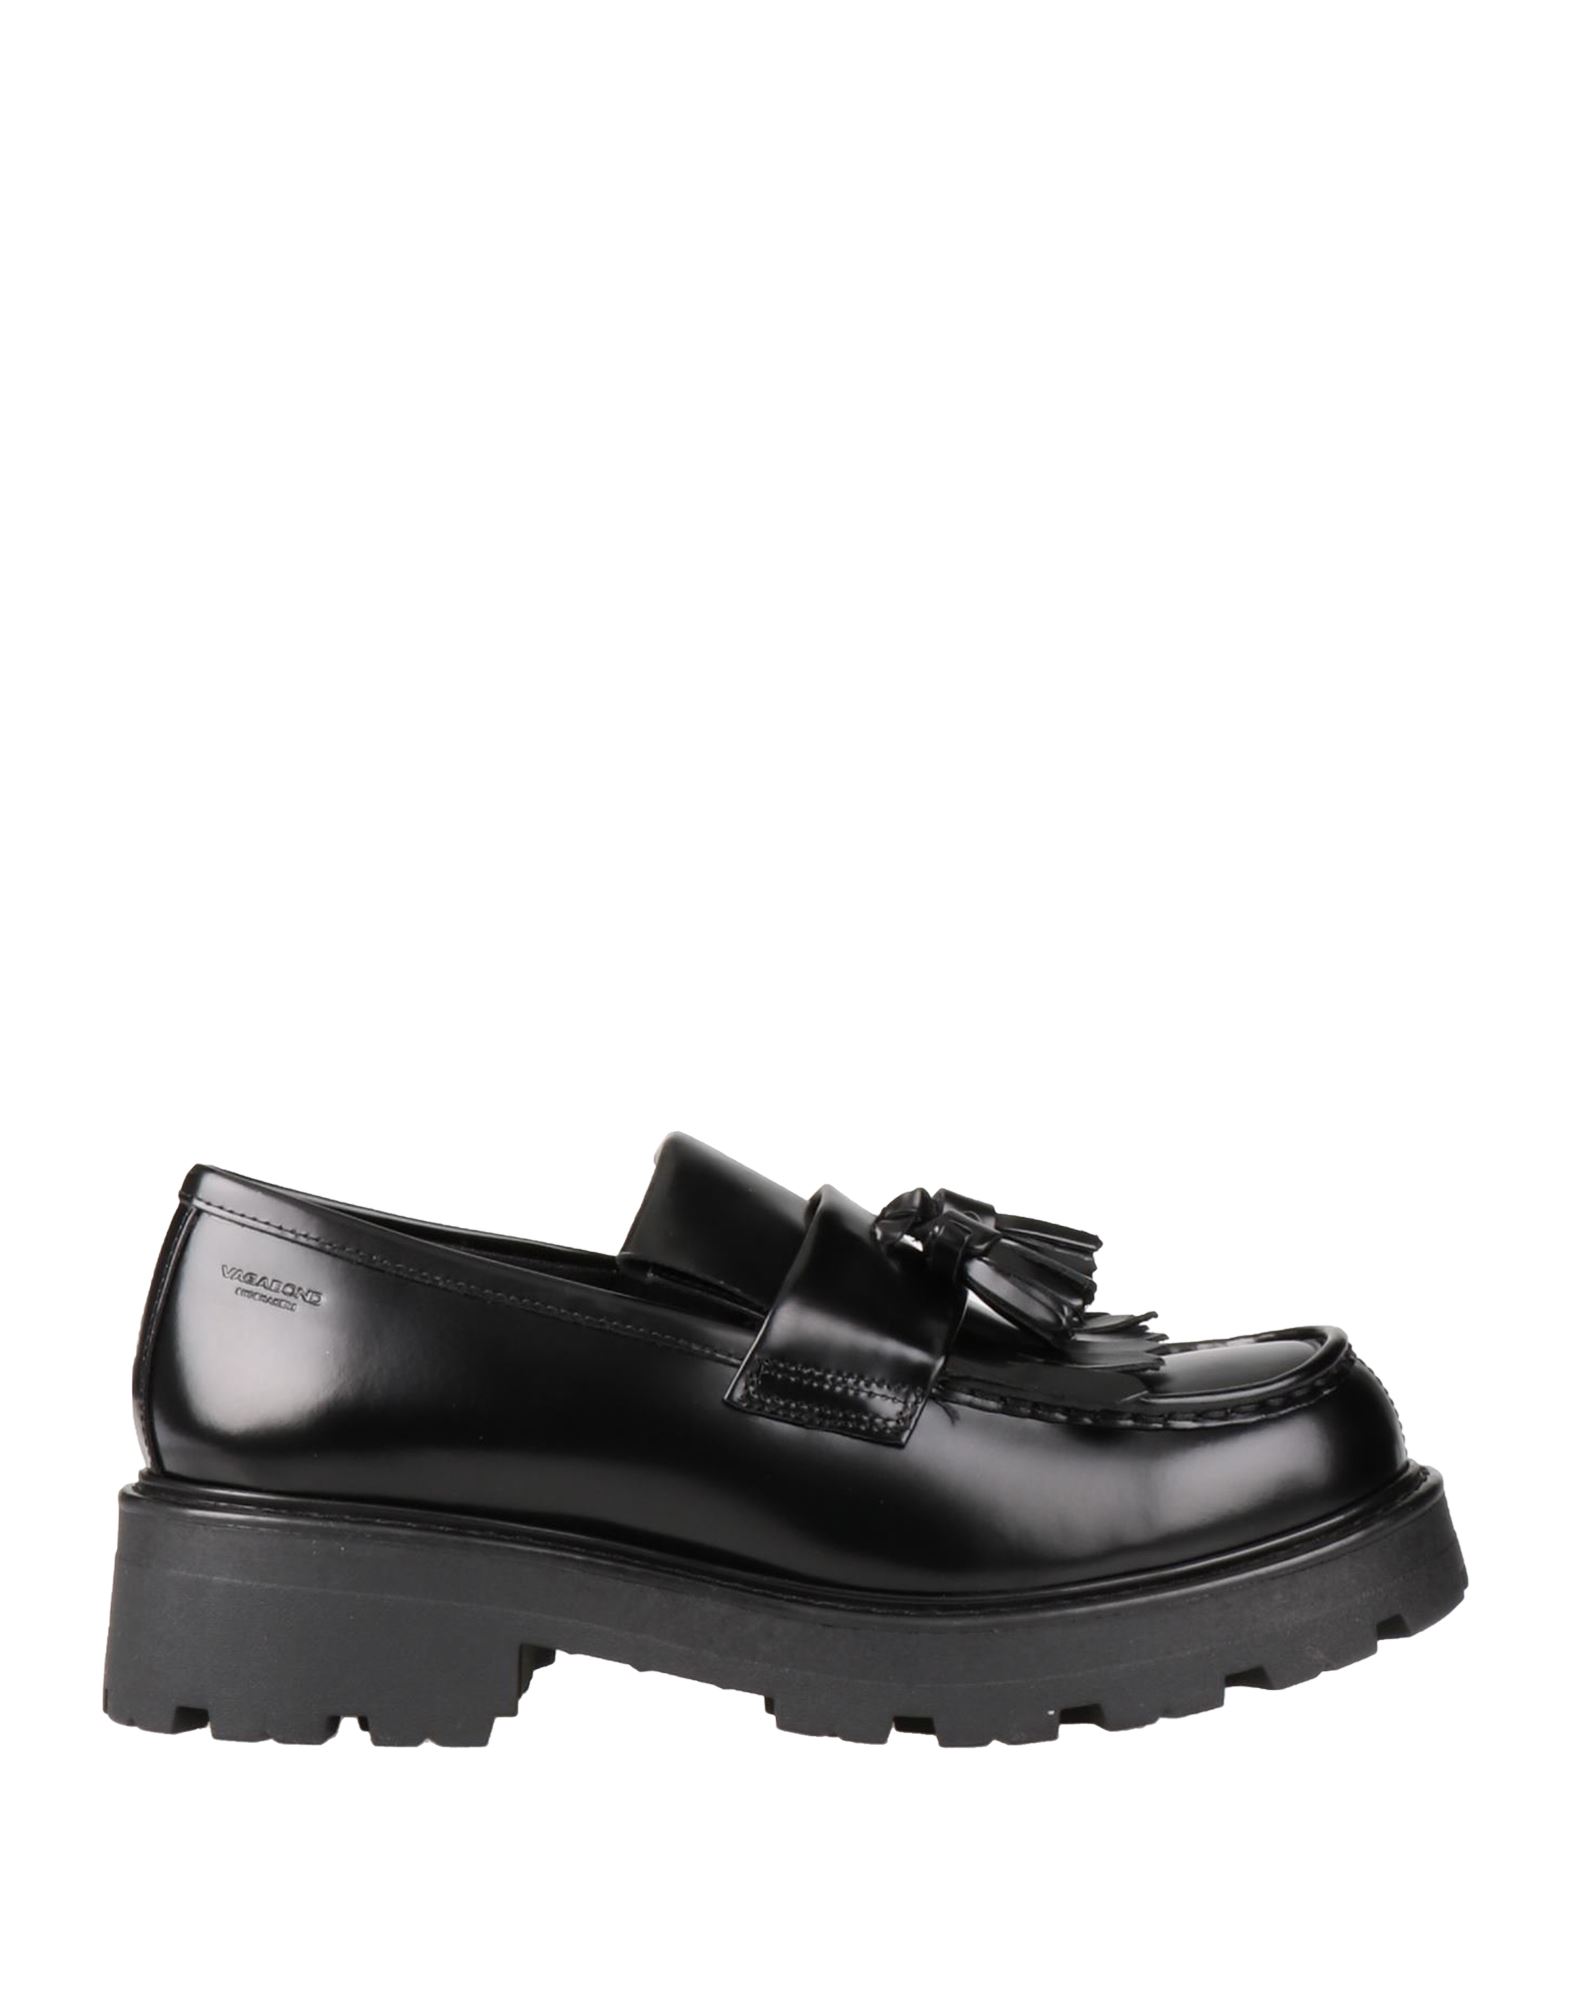 Shop Vagabond Shoemakers Cosmo 2.0 Cow Leather Black Woman Loafers Black Size 7 Bovine Leather